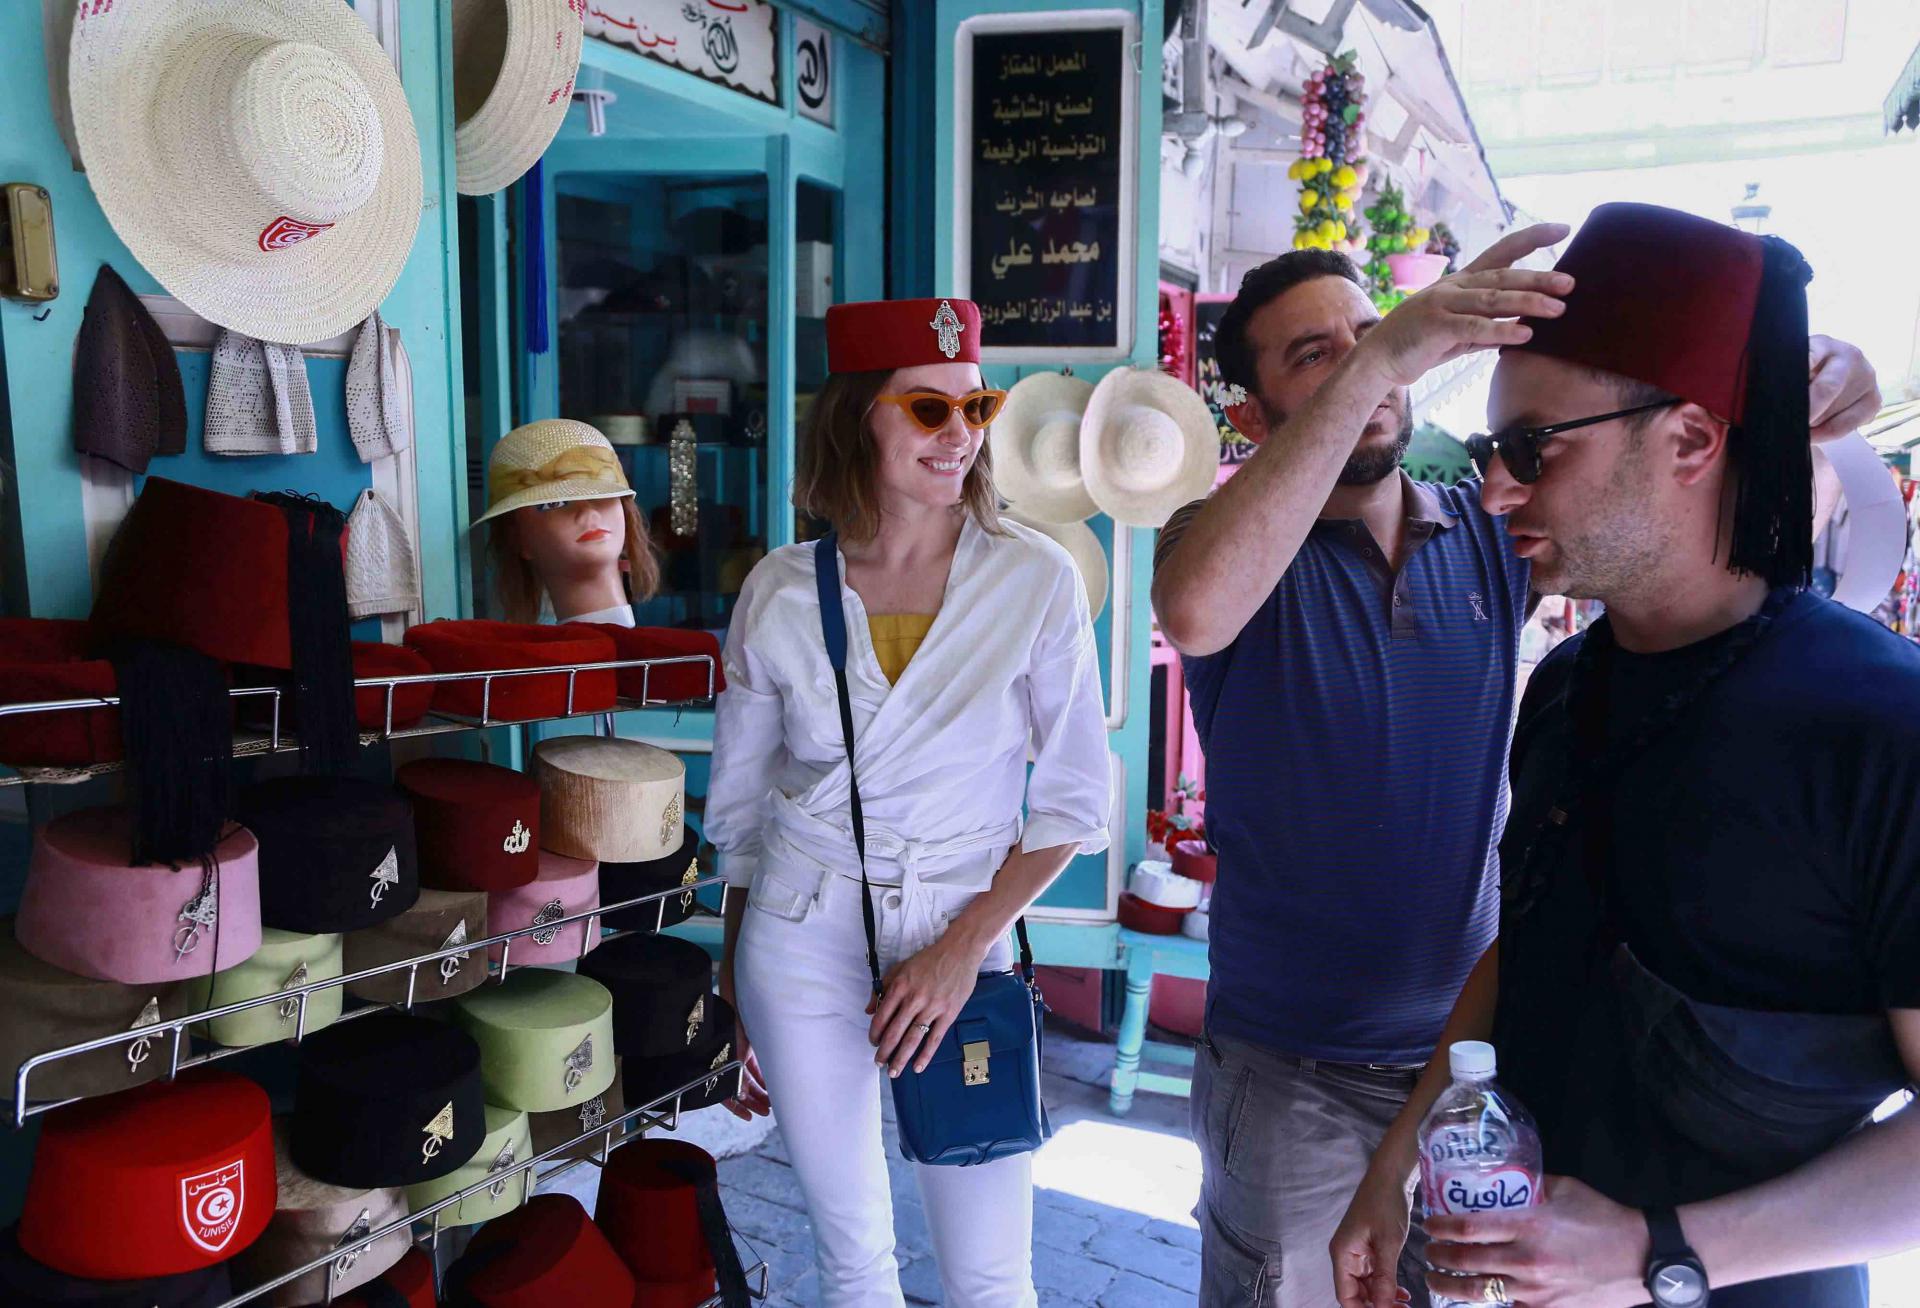 A tourist tries on a Tunisian “chechia” (traditional fez) in a shop at a bazaar in the Medina (old town) of Tunis